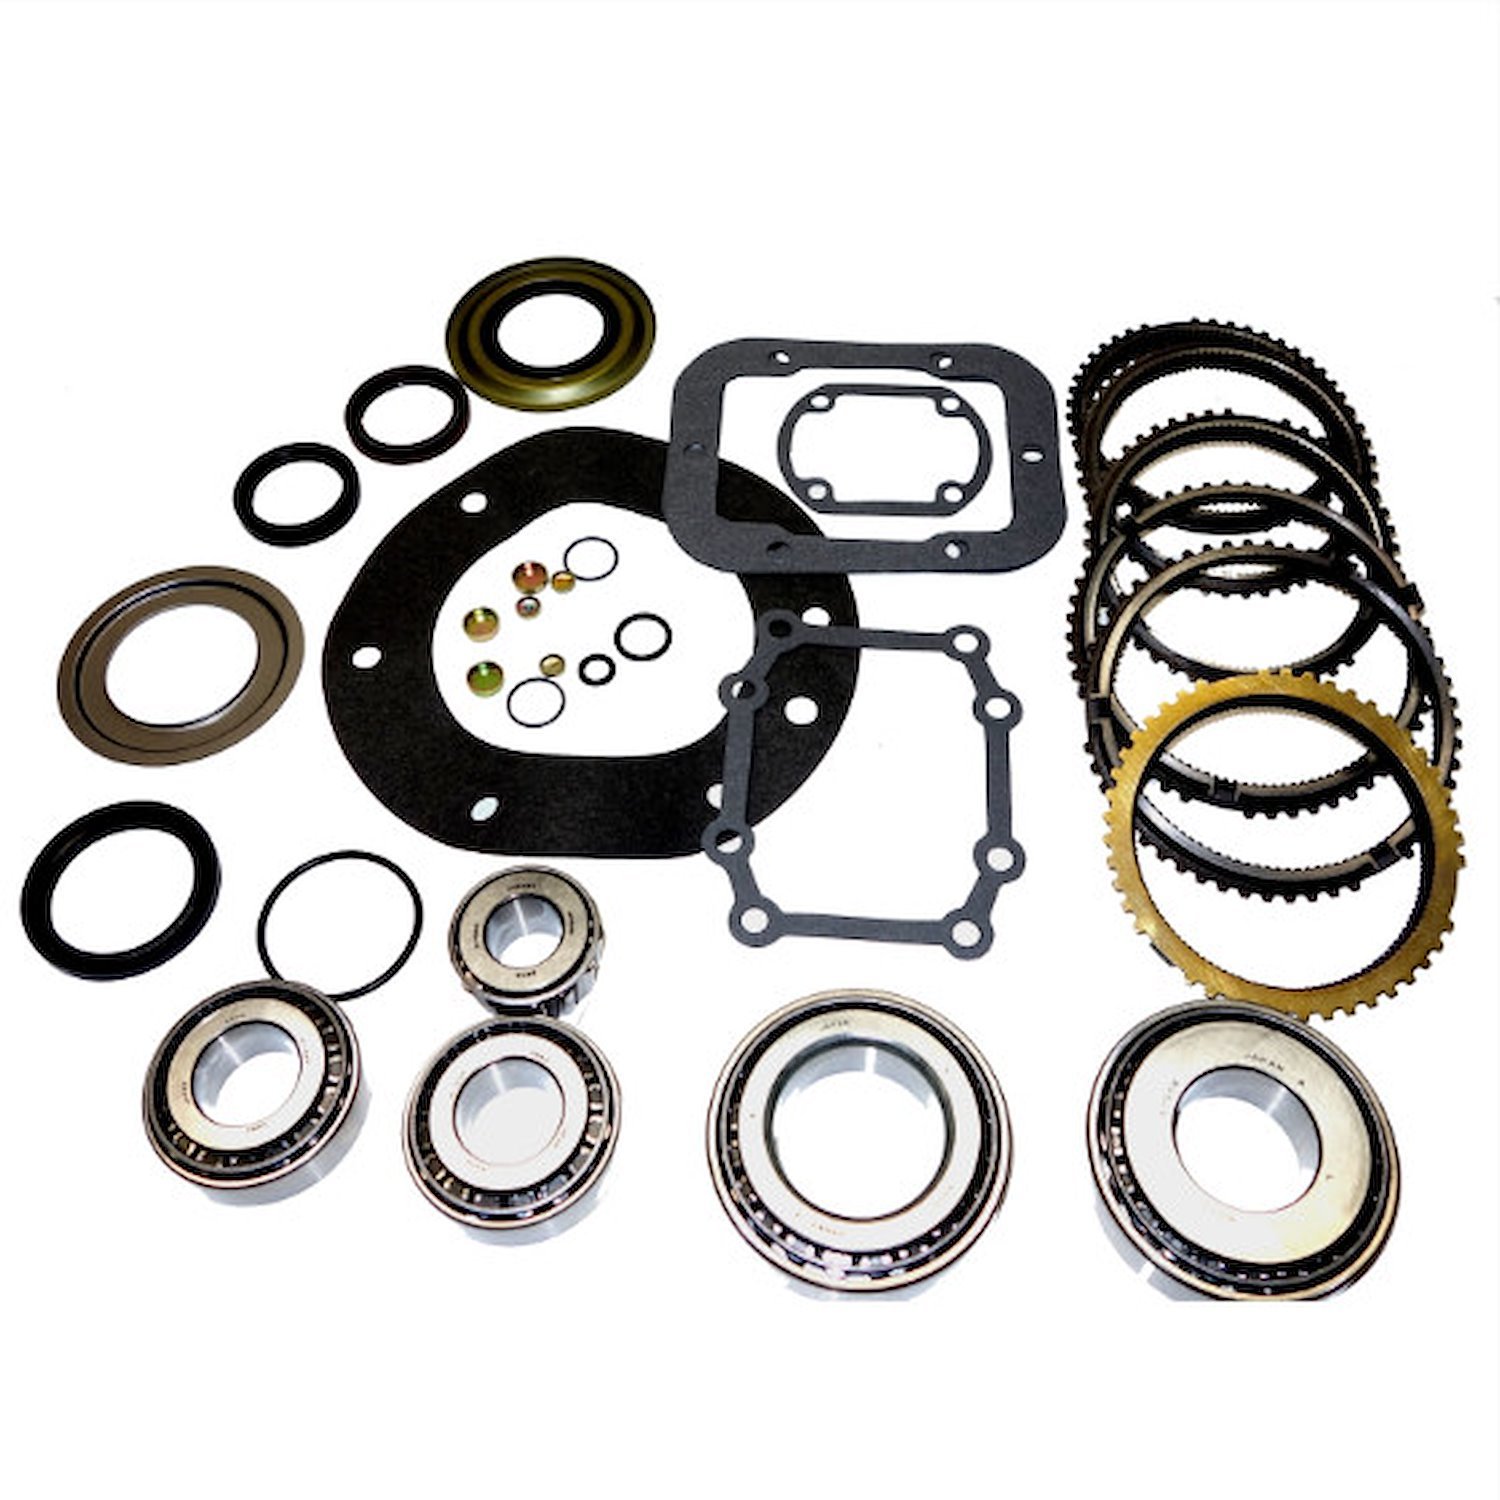 USA Standard 77506 Manual Transmission Bearing Kit, Zf542 With Synchro'S